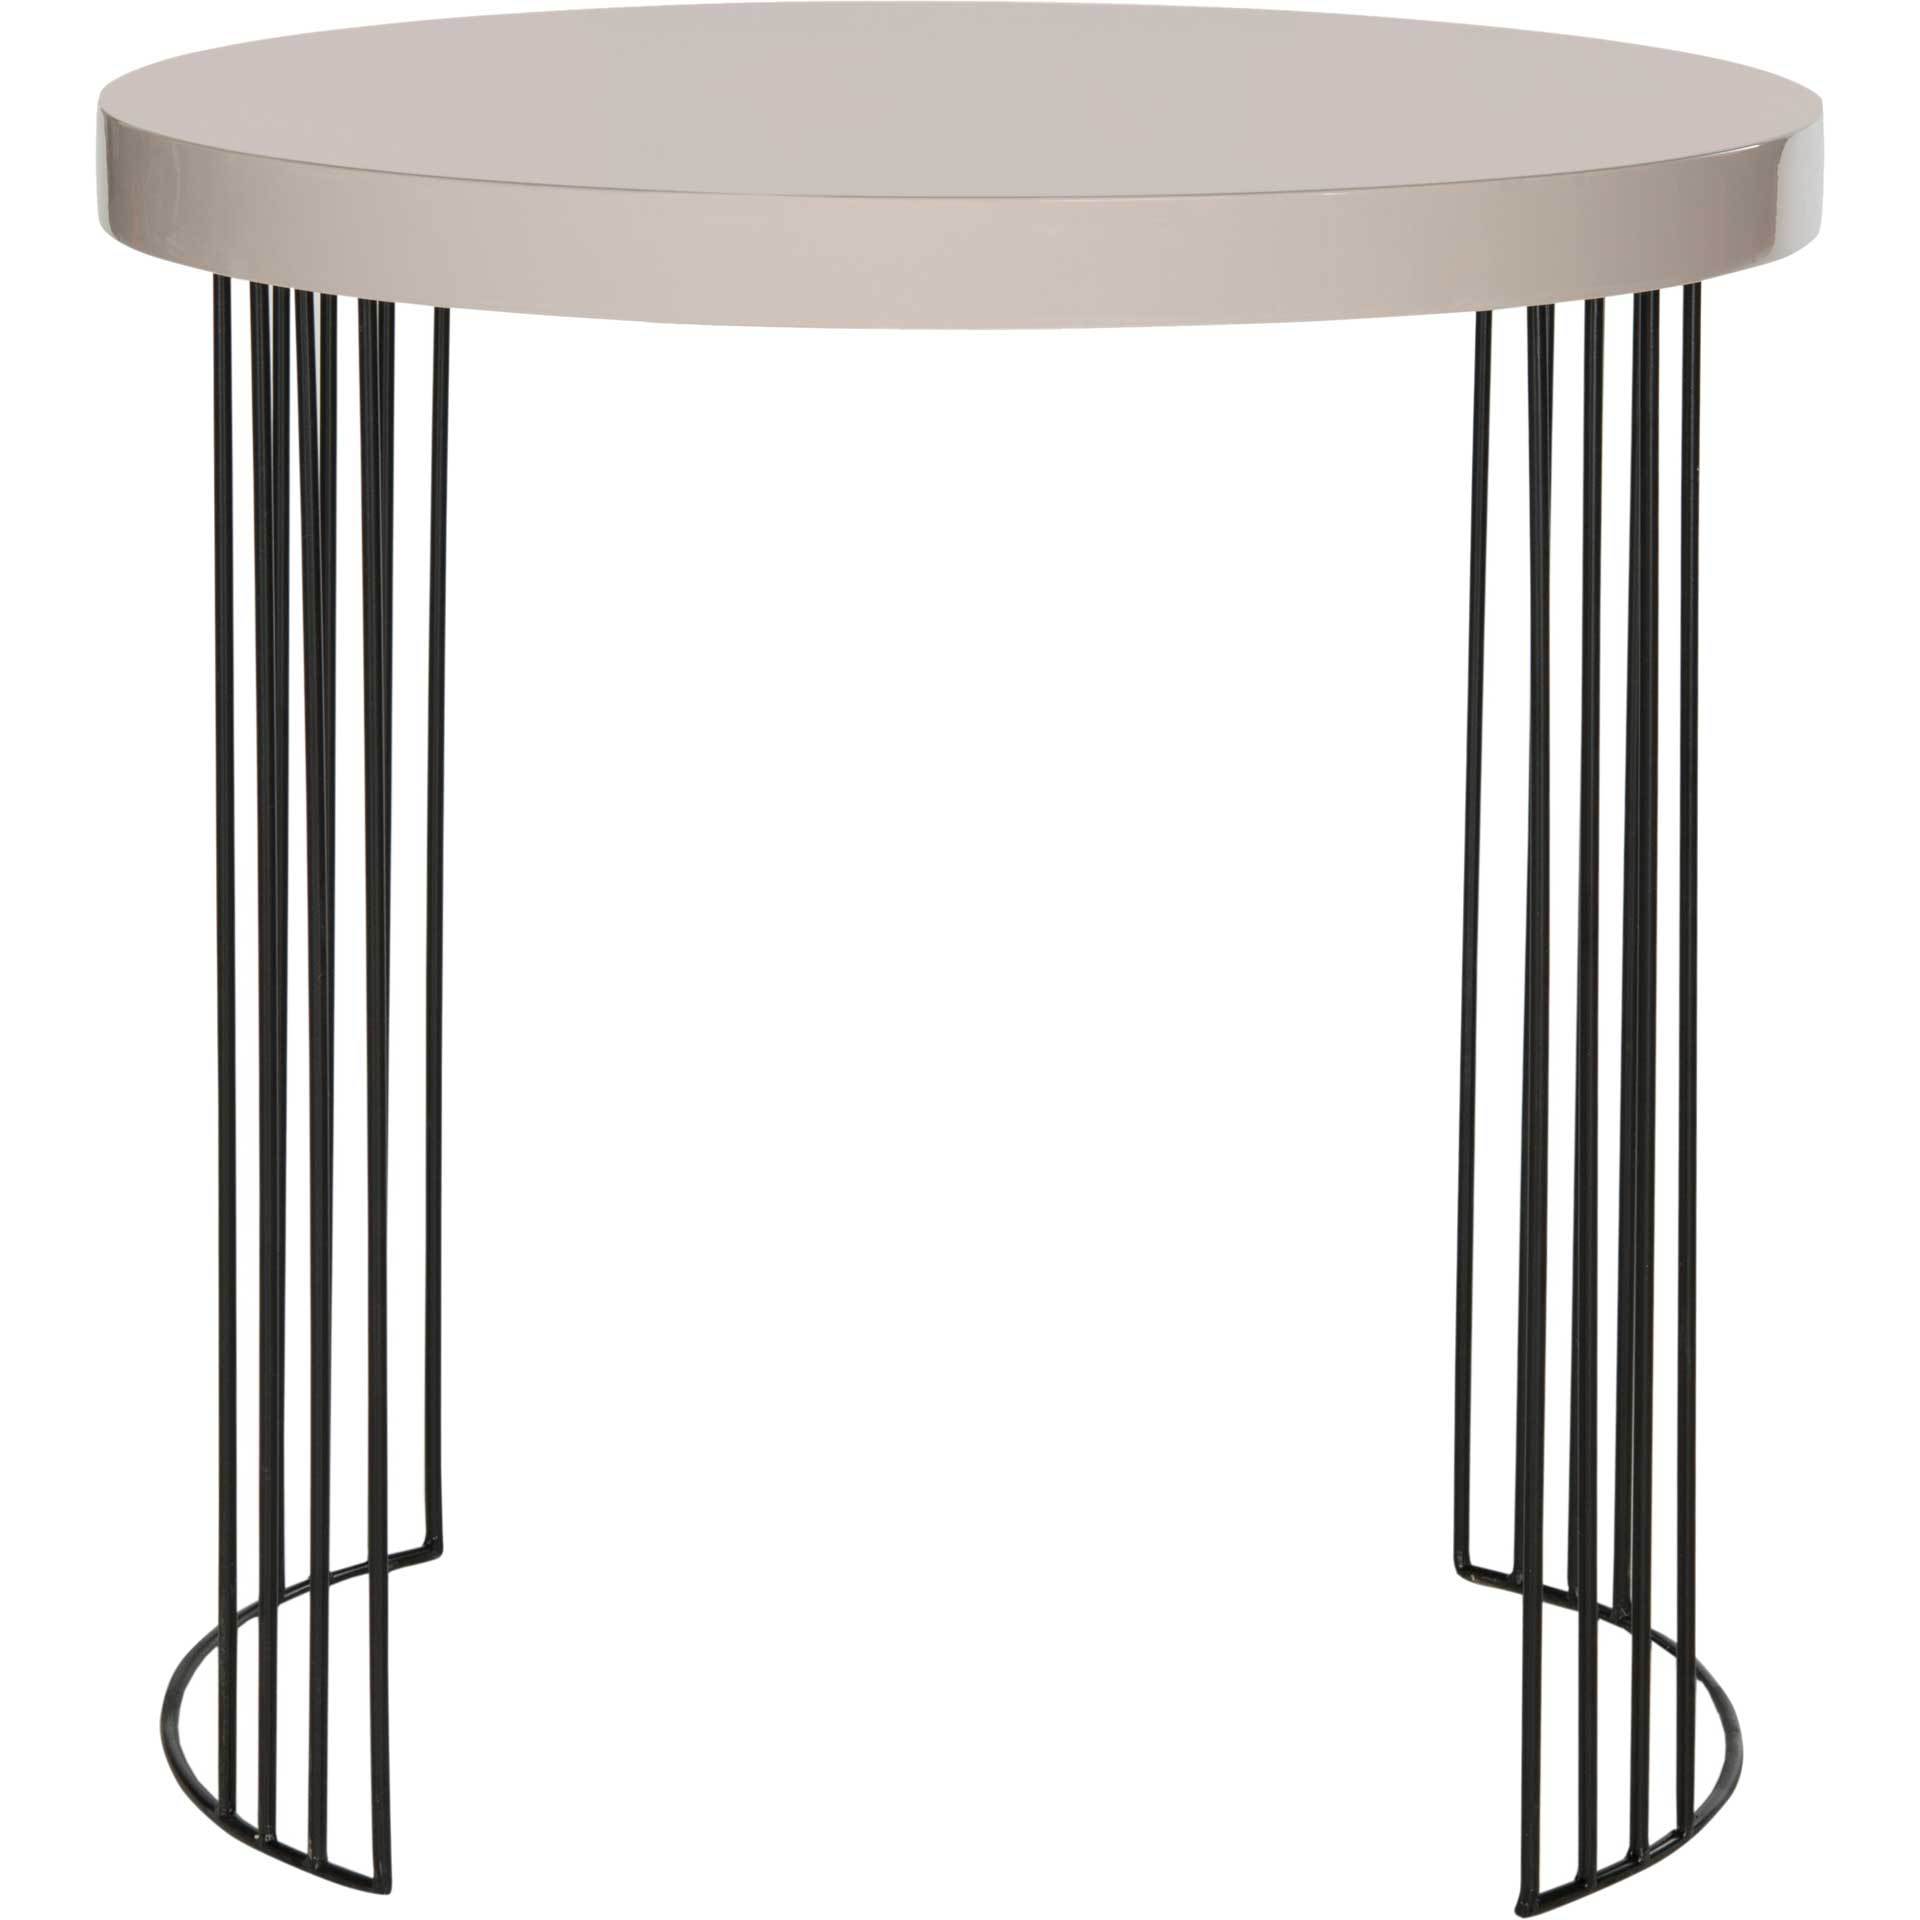 Keyon Lacquer Side Table Taupe